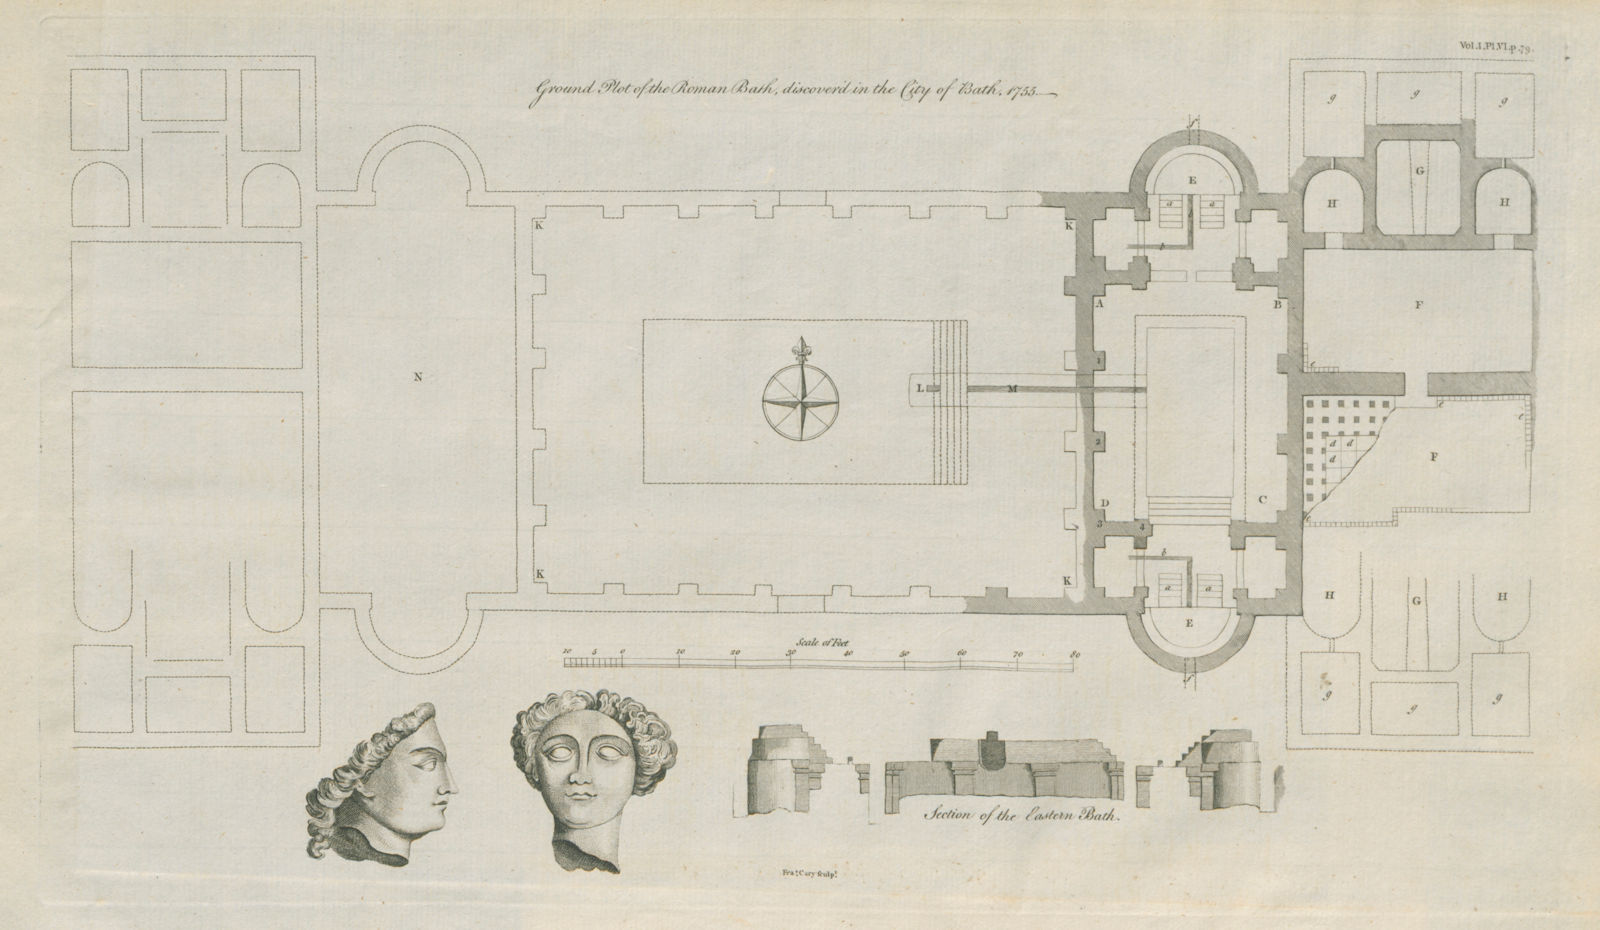 Associate Product Ground plot of the Roman Bath discover'd in the City of Bath 1755. CARY 1789 map